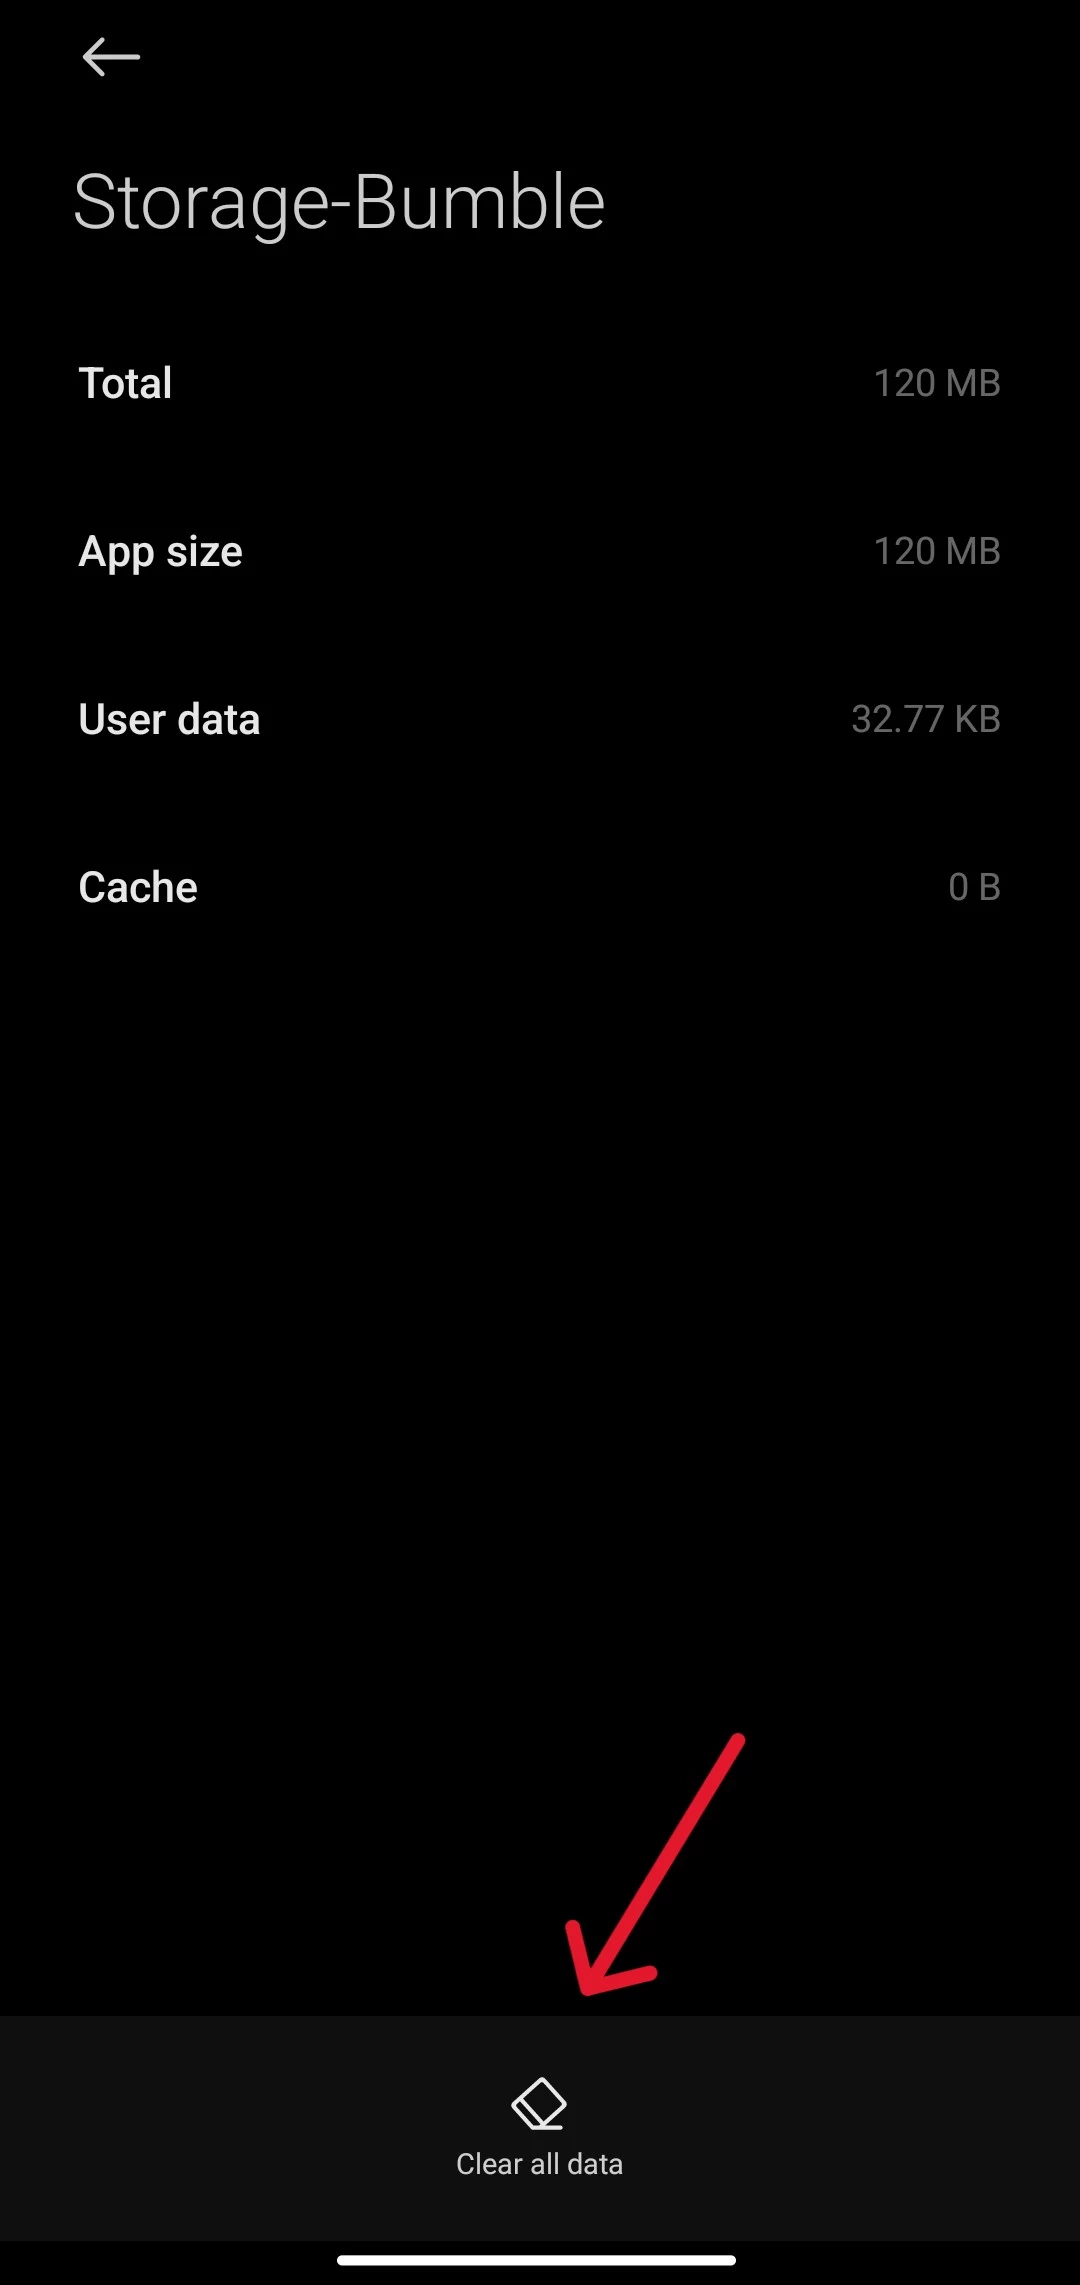 How to clear cache and temp data for Bumble on Android